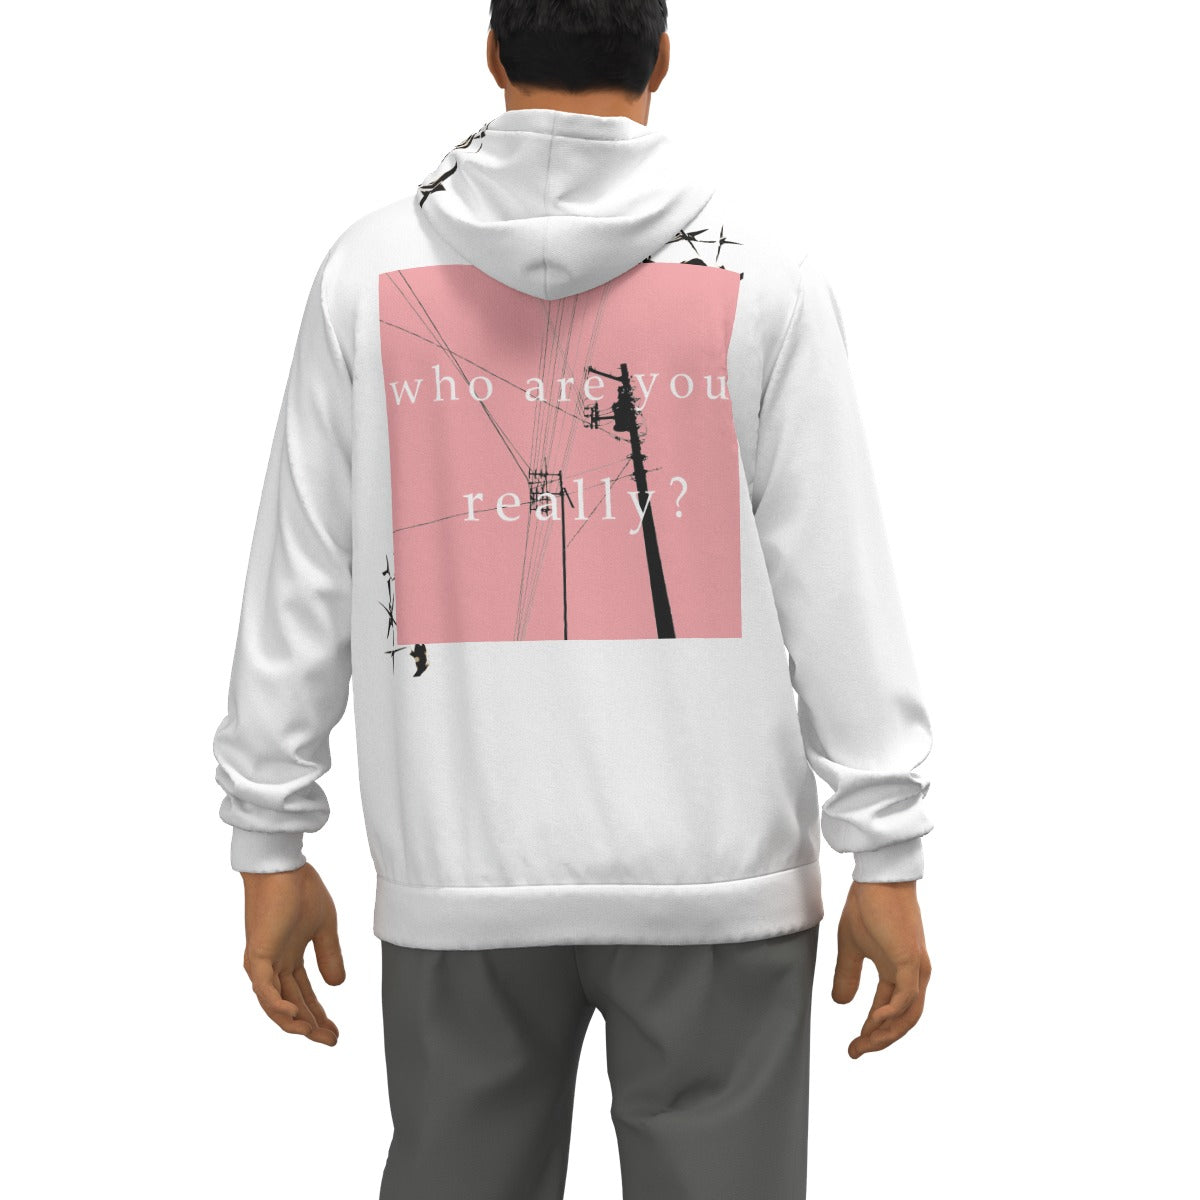 "who are you really" - hoodie design2